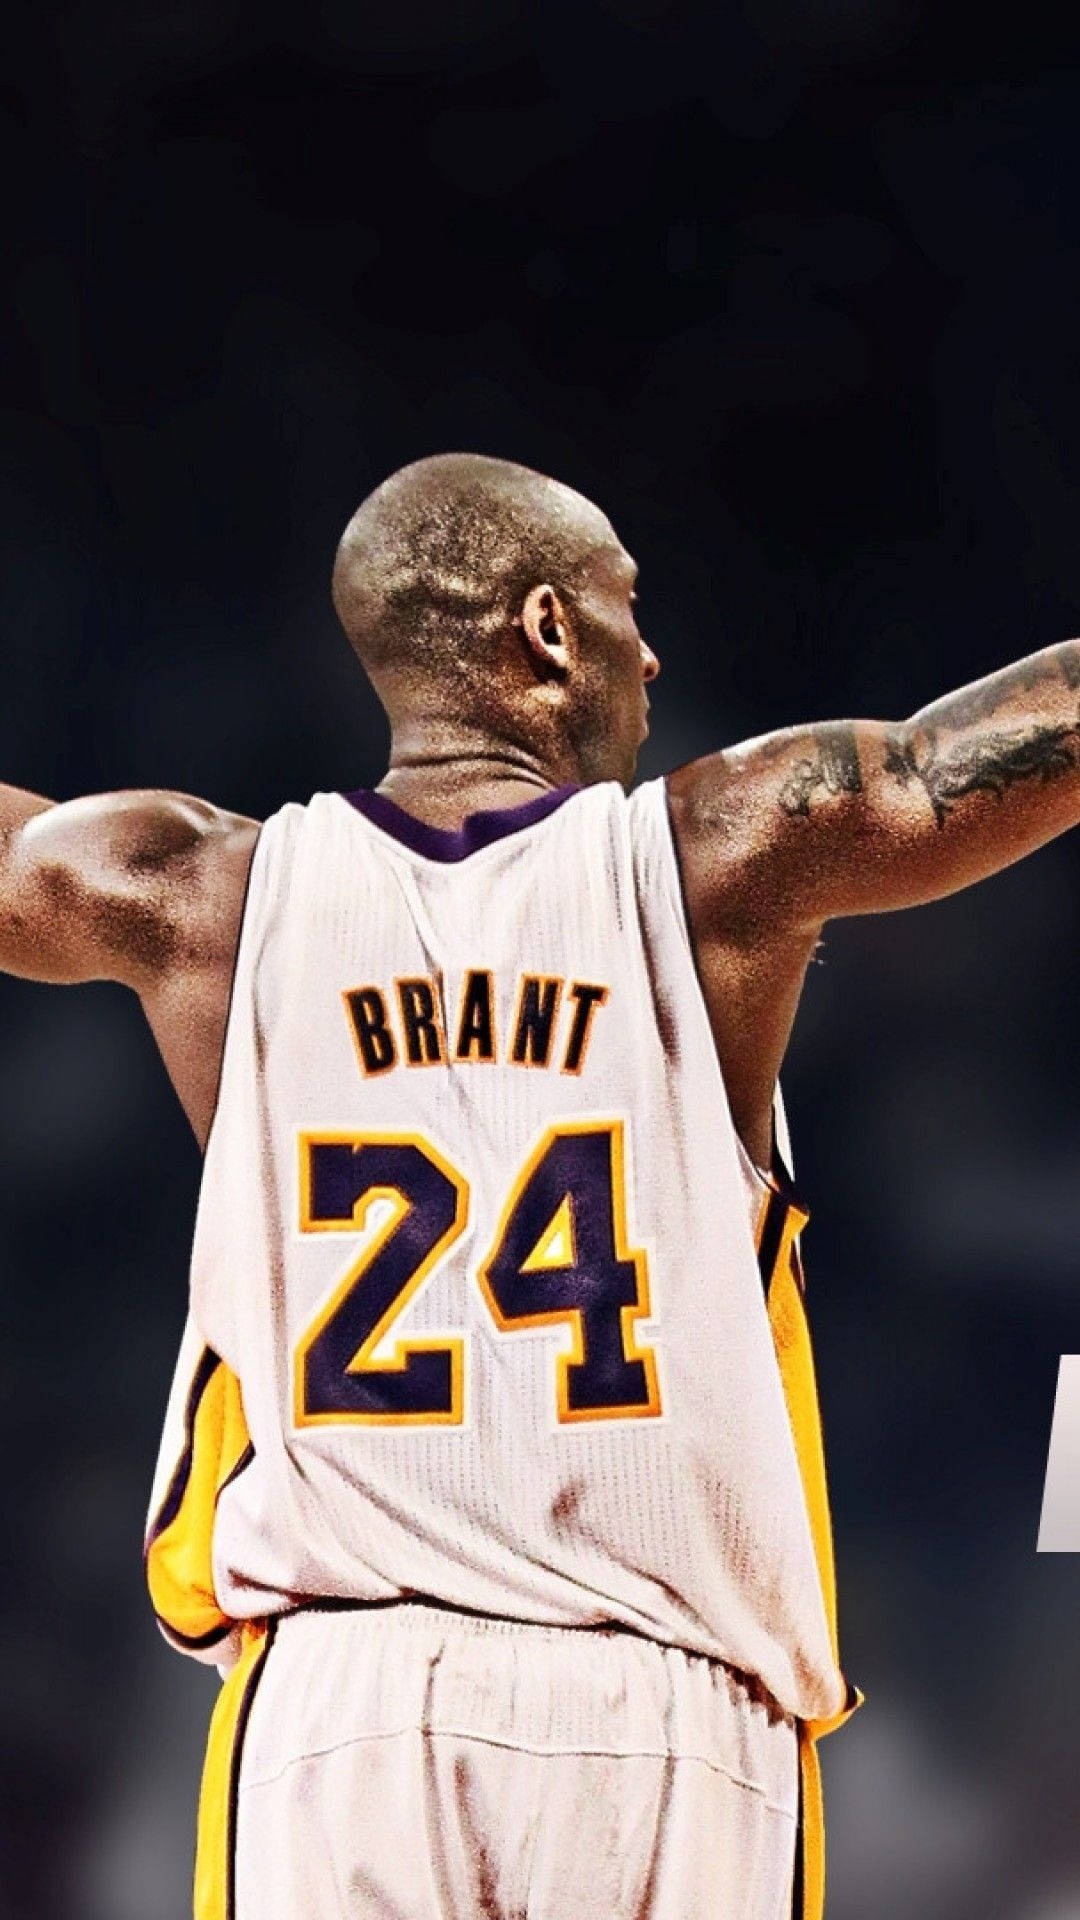 "Show your love for the legendary Kobe Bryant with this unique design!" Wallpaper